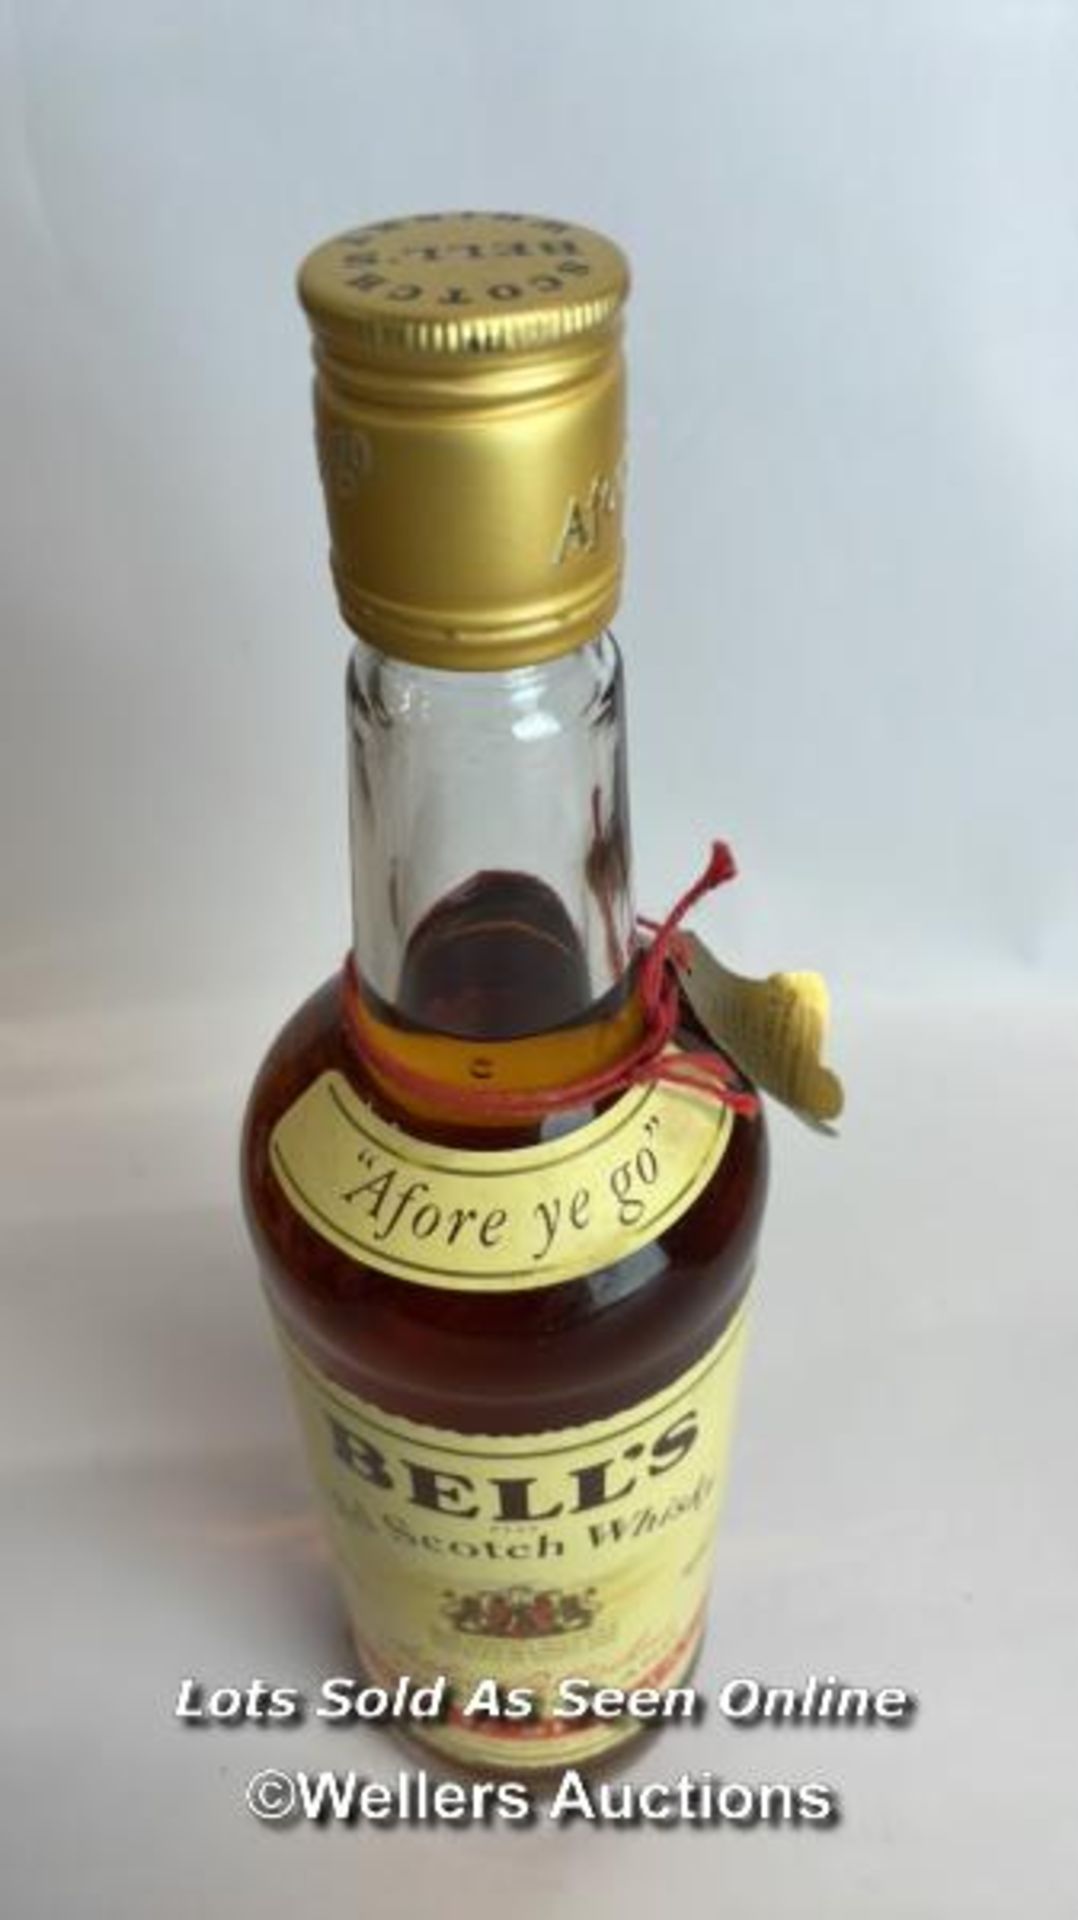 Bell's Extra Special Old Scotch Whisky, "Afore Ye Go", 75cl, 43% vol, In original box / Please see - Image 11 of 12